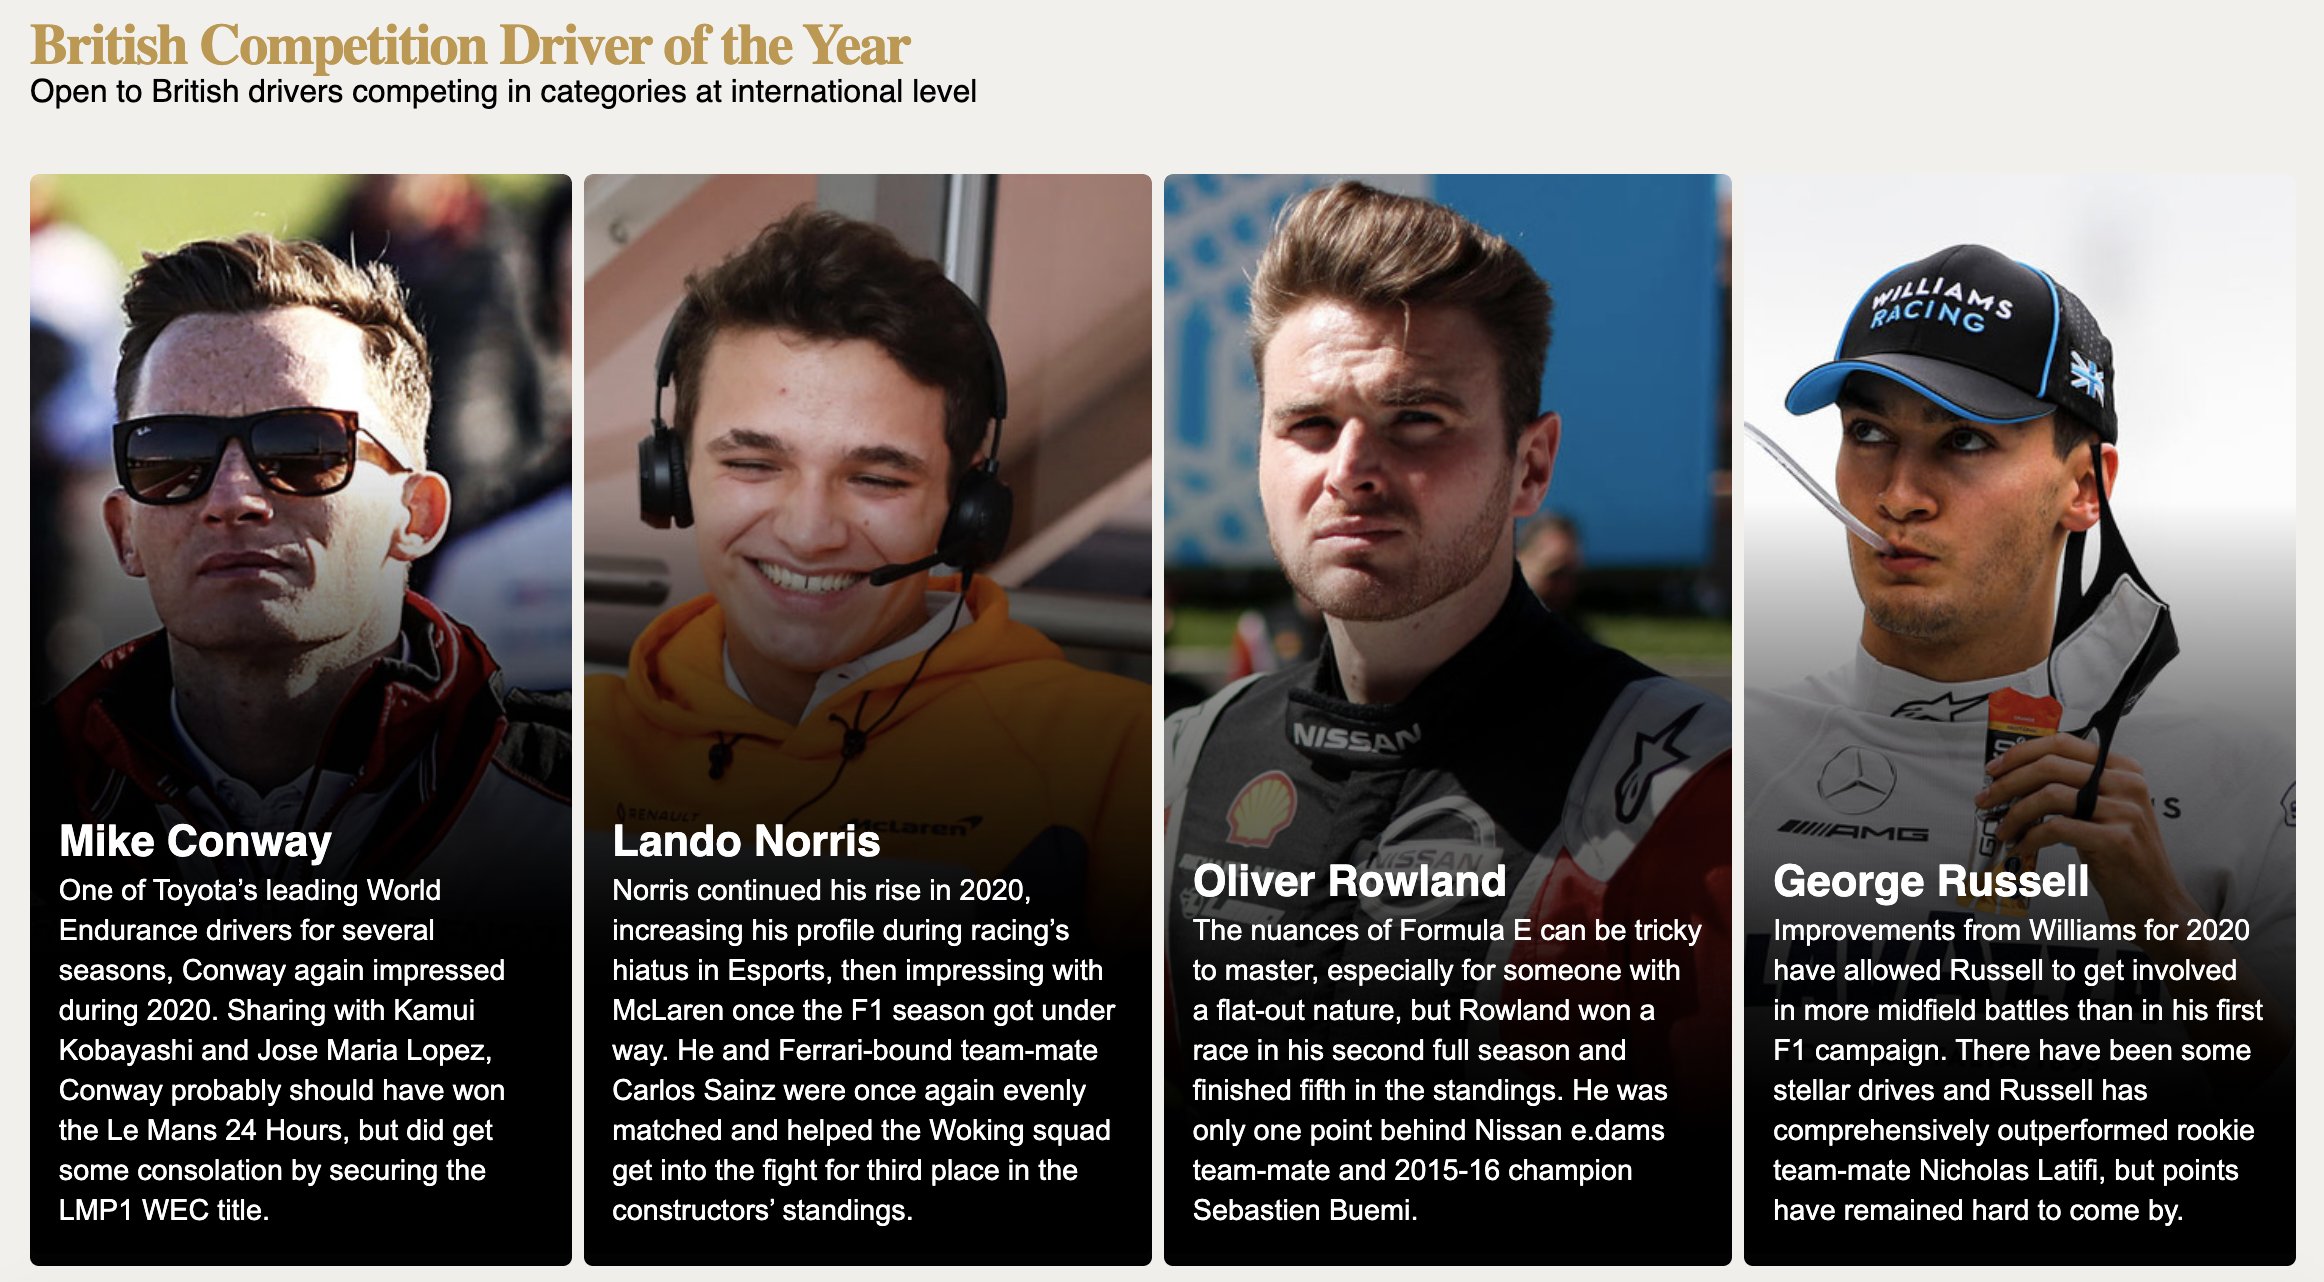 Norris named Autosport's British Competition Driver of the Year